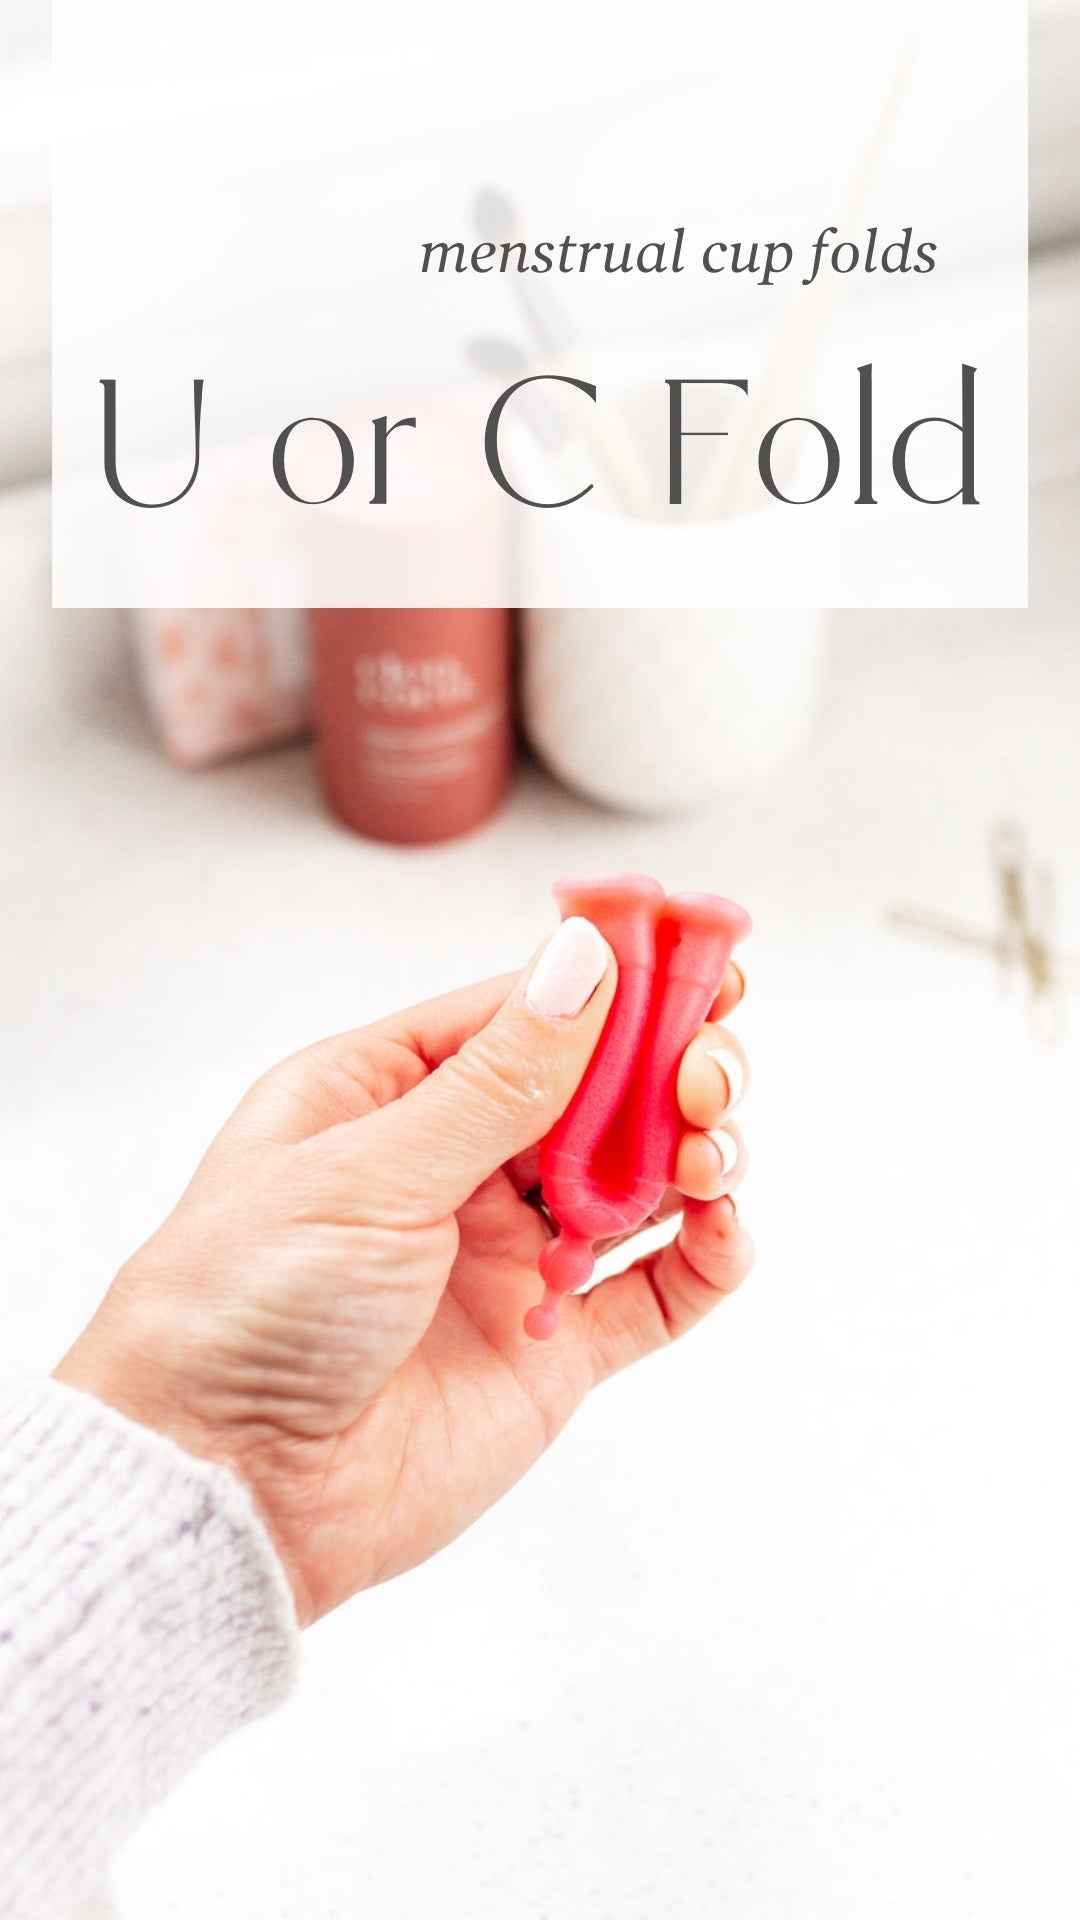 U or C Fold for Menstrual Cup